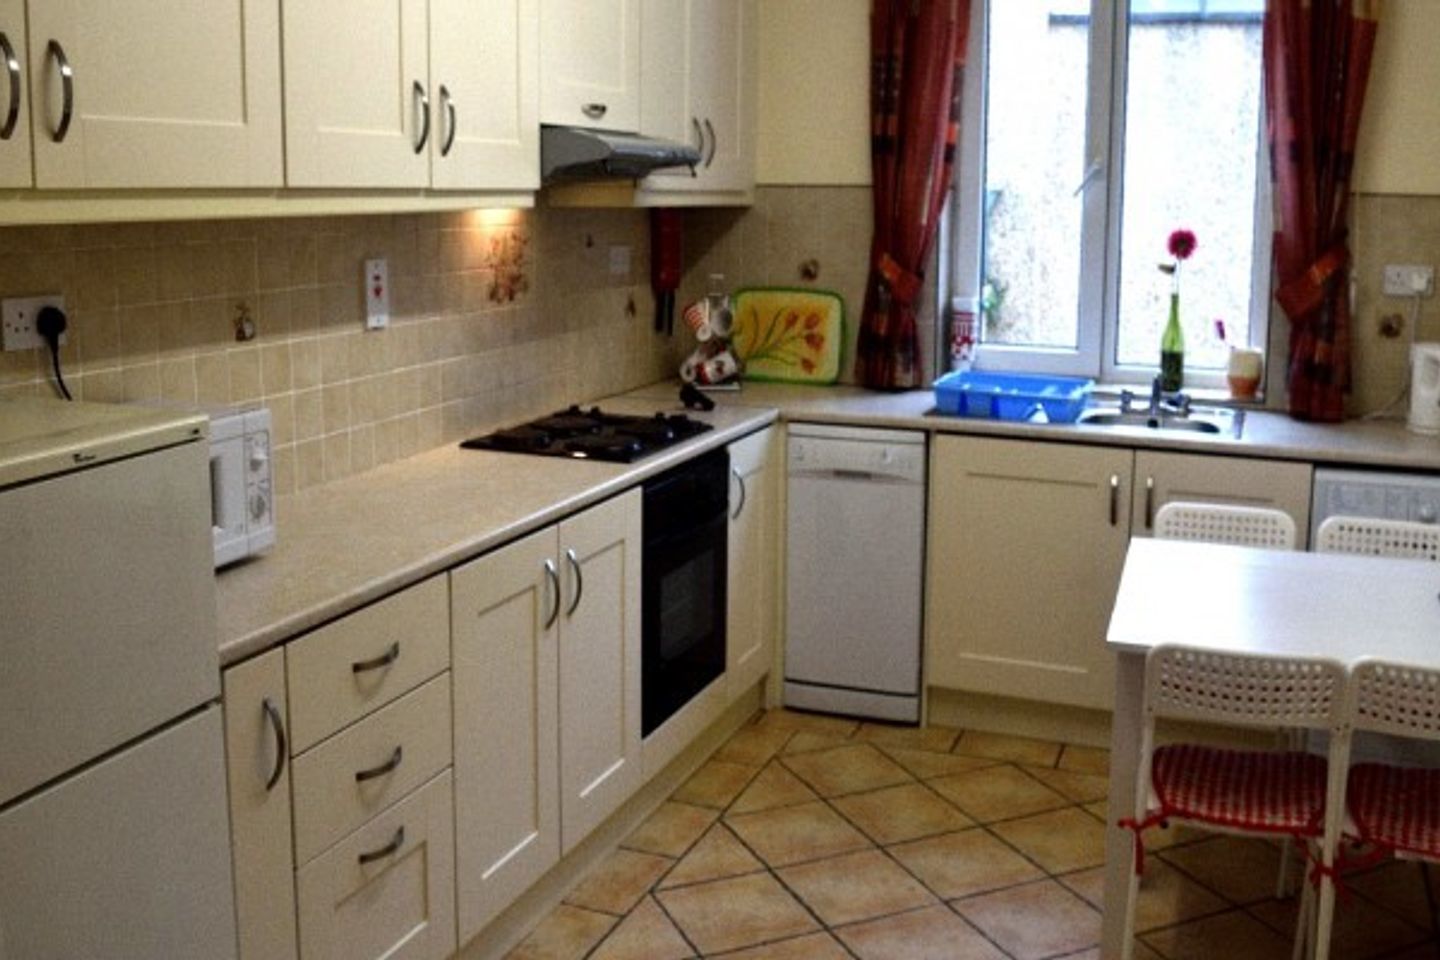 Apartment 2, Galway Town Homes, Saint Augustine St, Galway City Centre